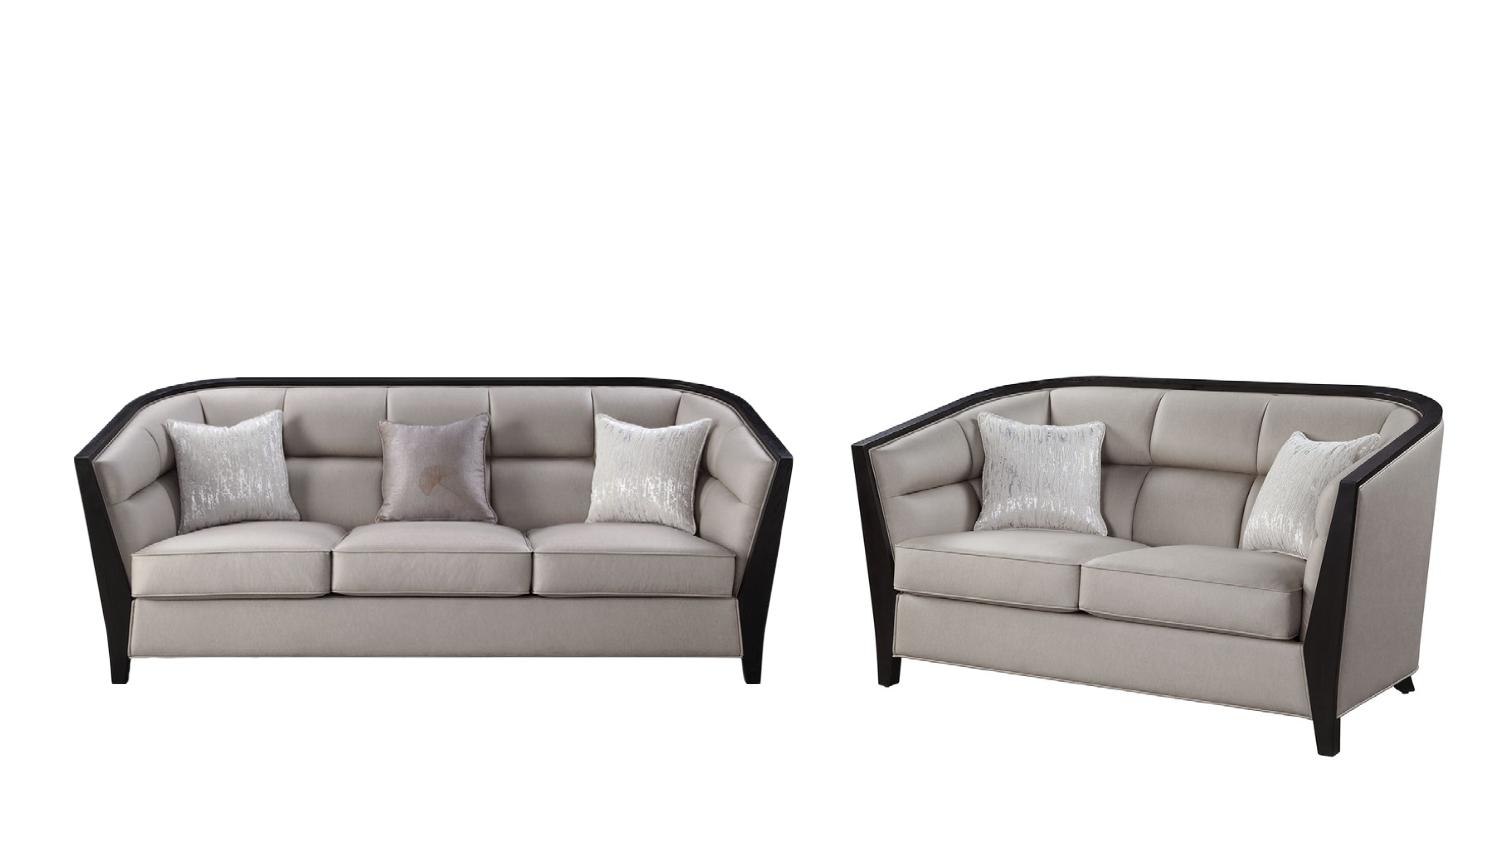 Contemporary, Classic Sofa and Loveseat Set Zemocryss 54235-2pcs in Beige Fabric